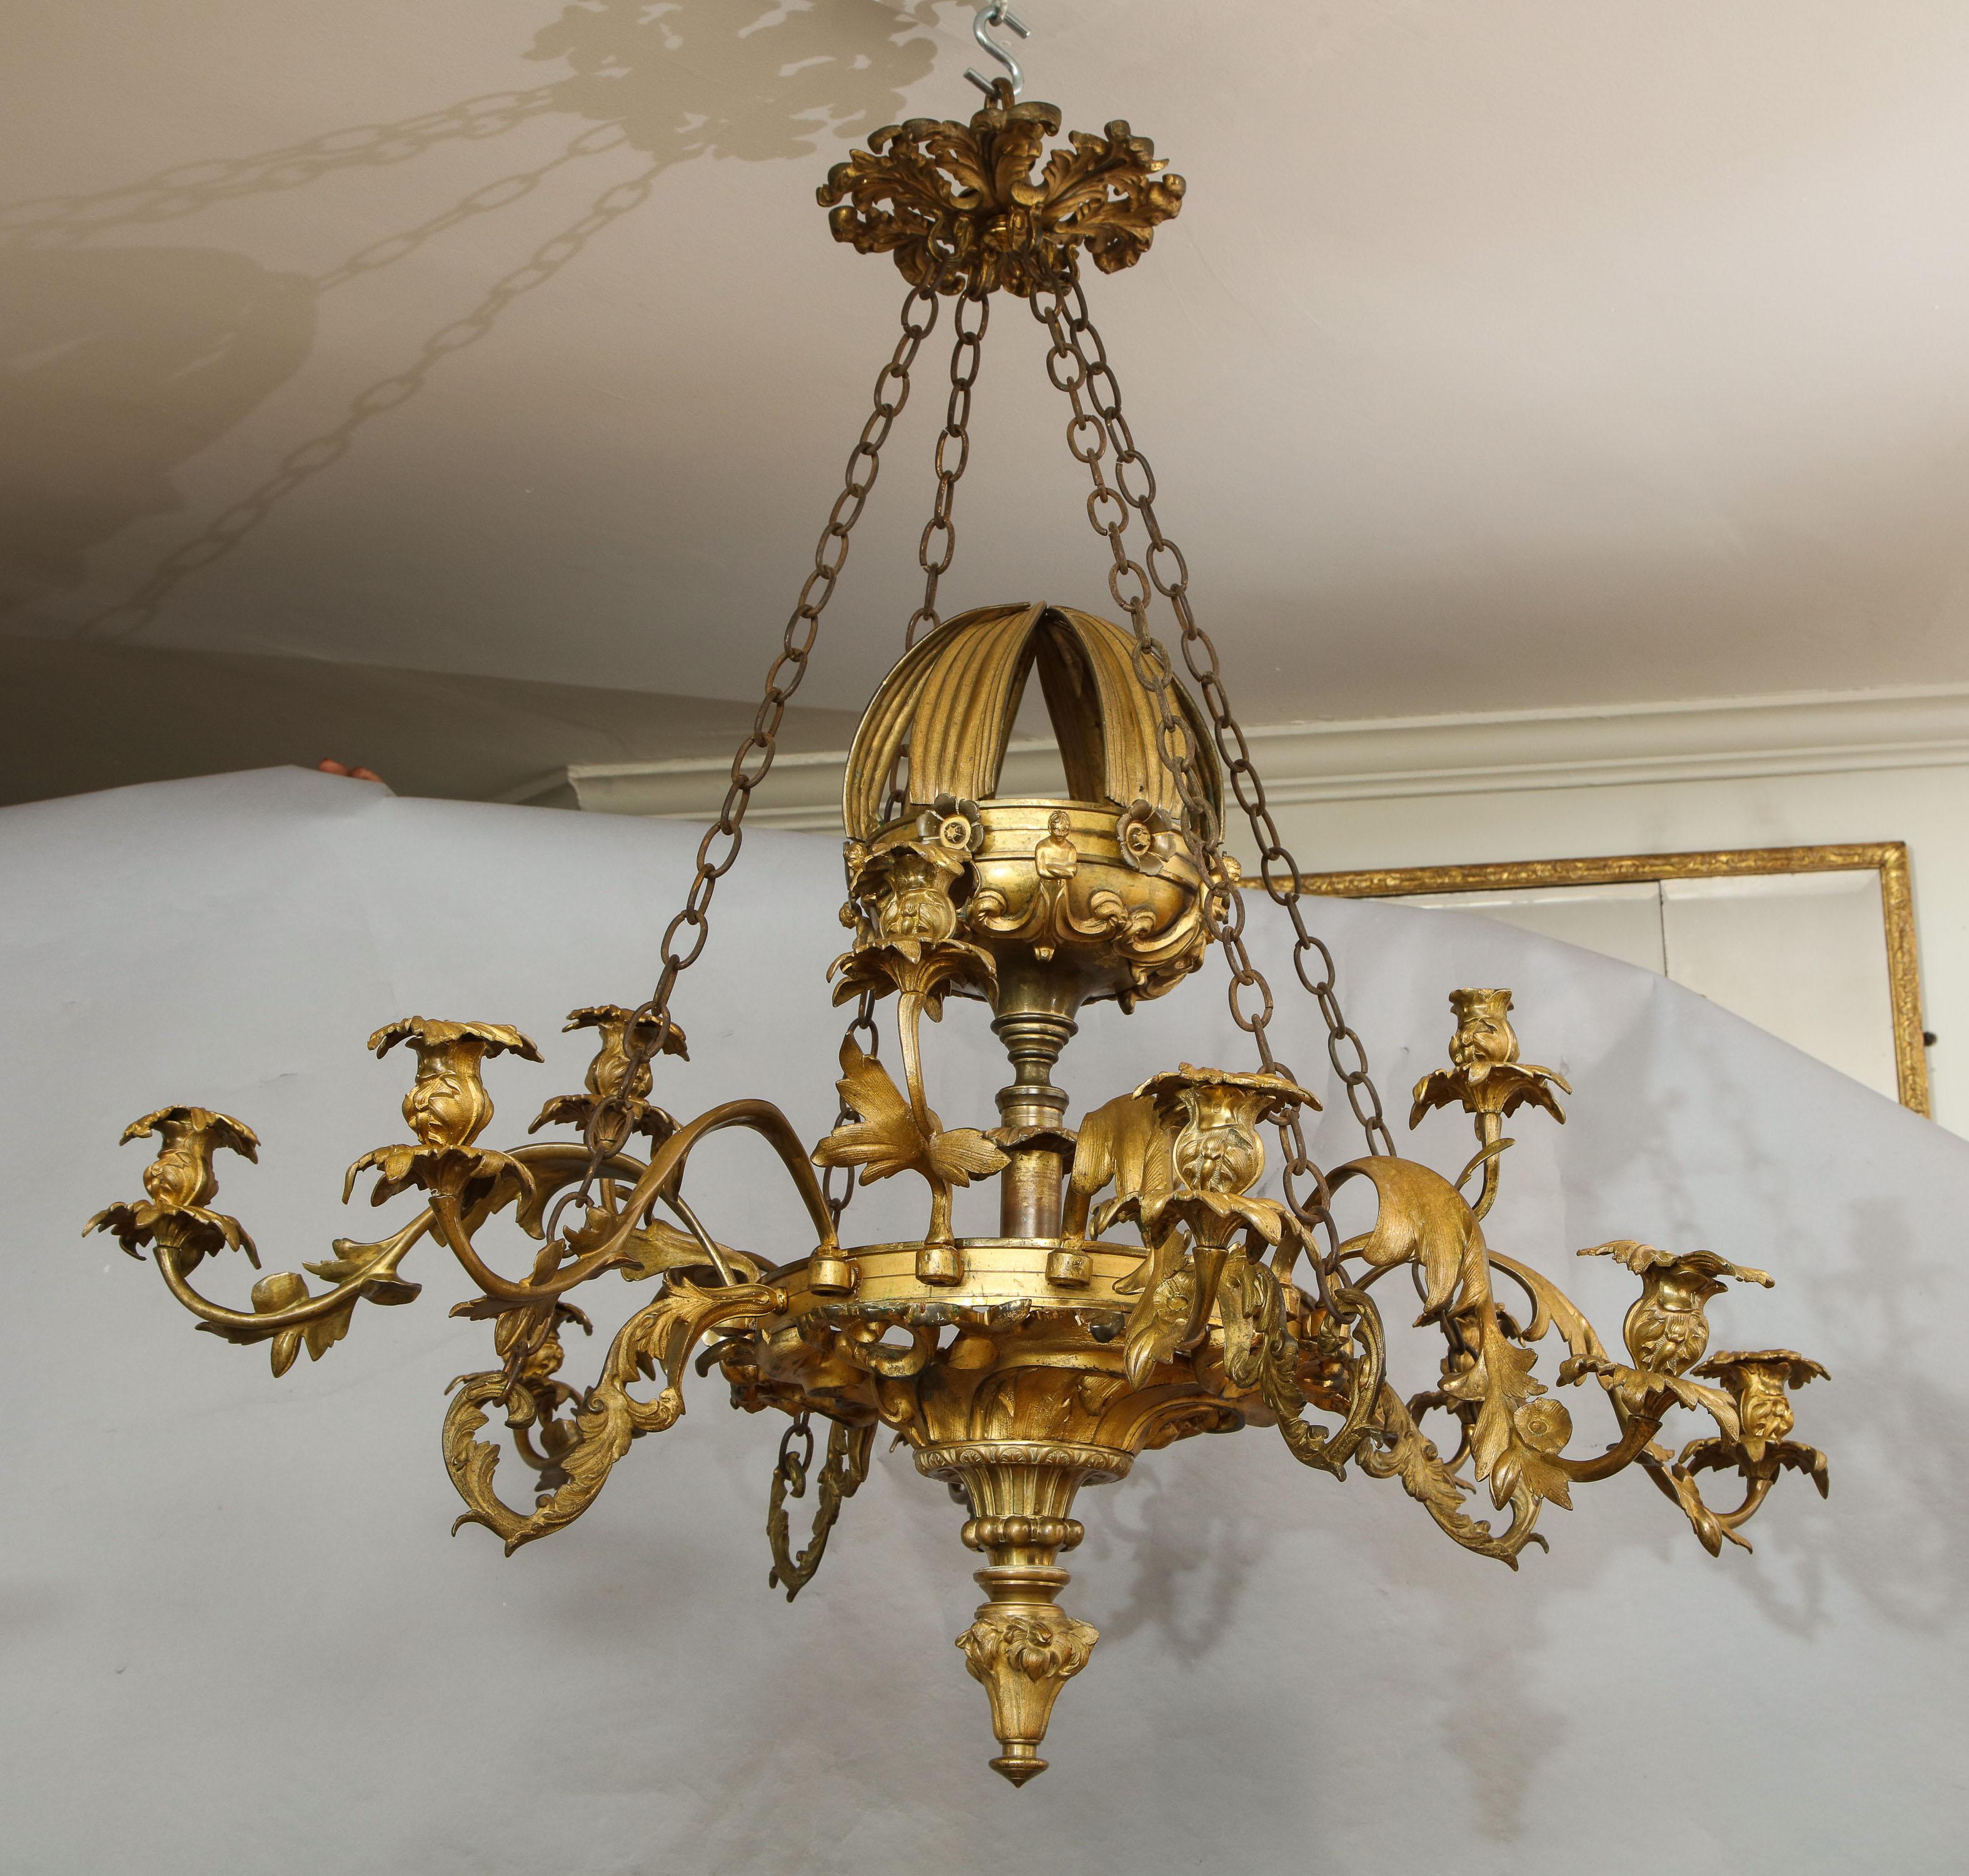 Very fine English gilt bronze 12-light chandelier, in the manner of Thomas Messenger of Birmingham, having chased foliate crown, over four chains supporting scrolled foliate arms, the similarly designed arms of two lengths and heights, the base with